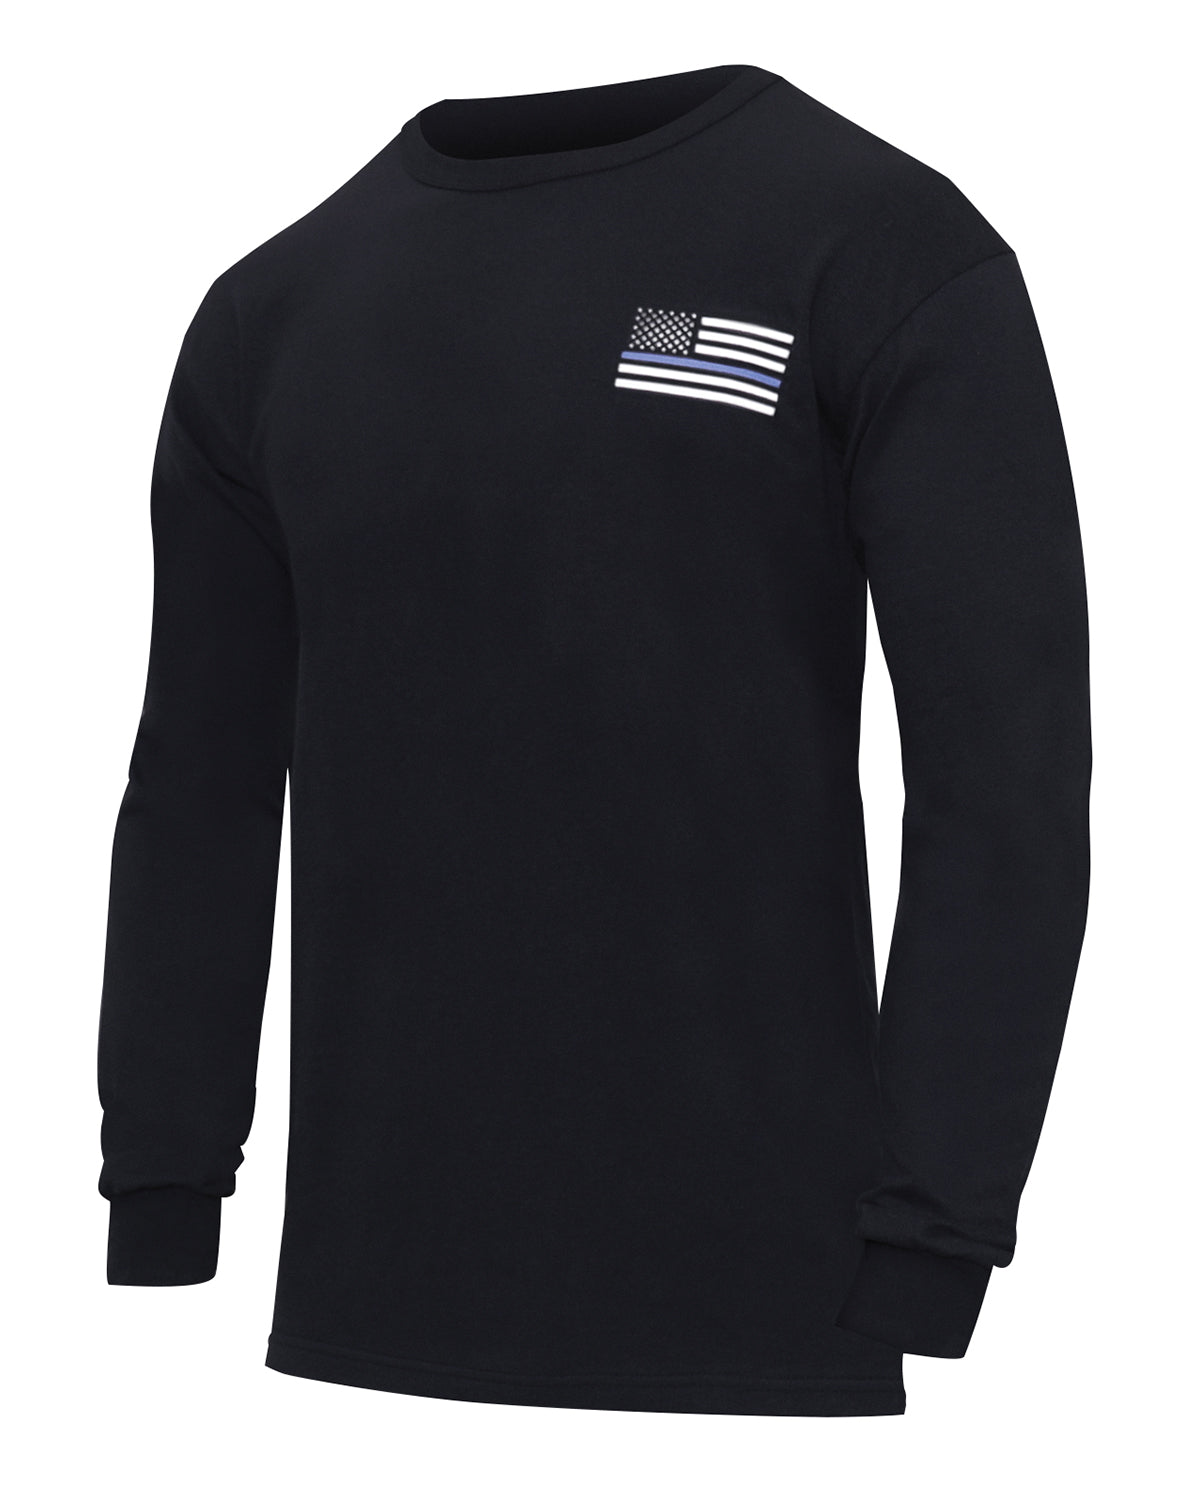 [Public Safety] Poly/Cotton Honor Respect Thin Blue Line Long Sleeve Shirts Police Blue Line - Black